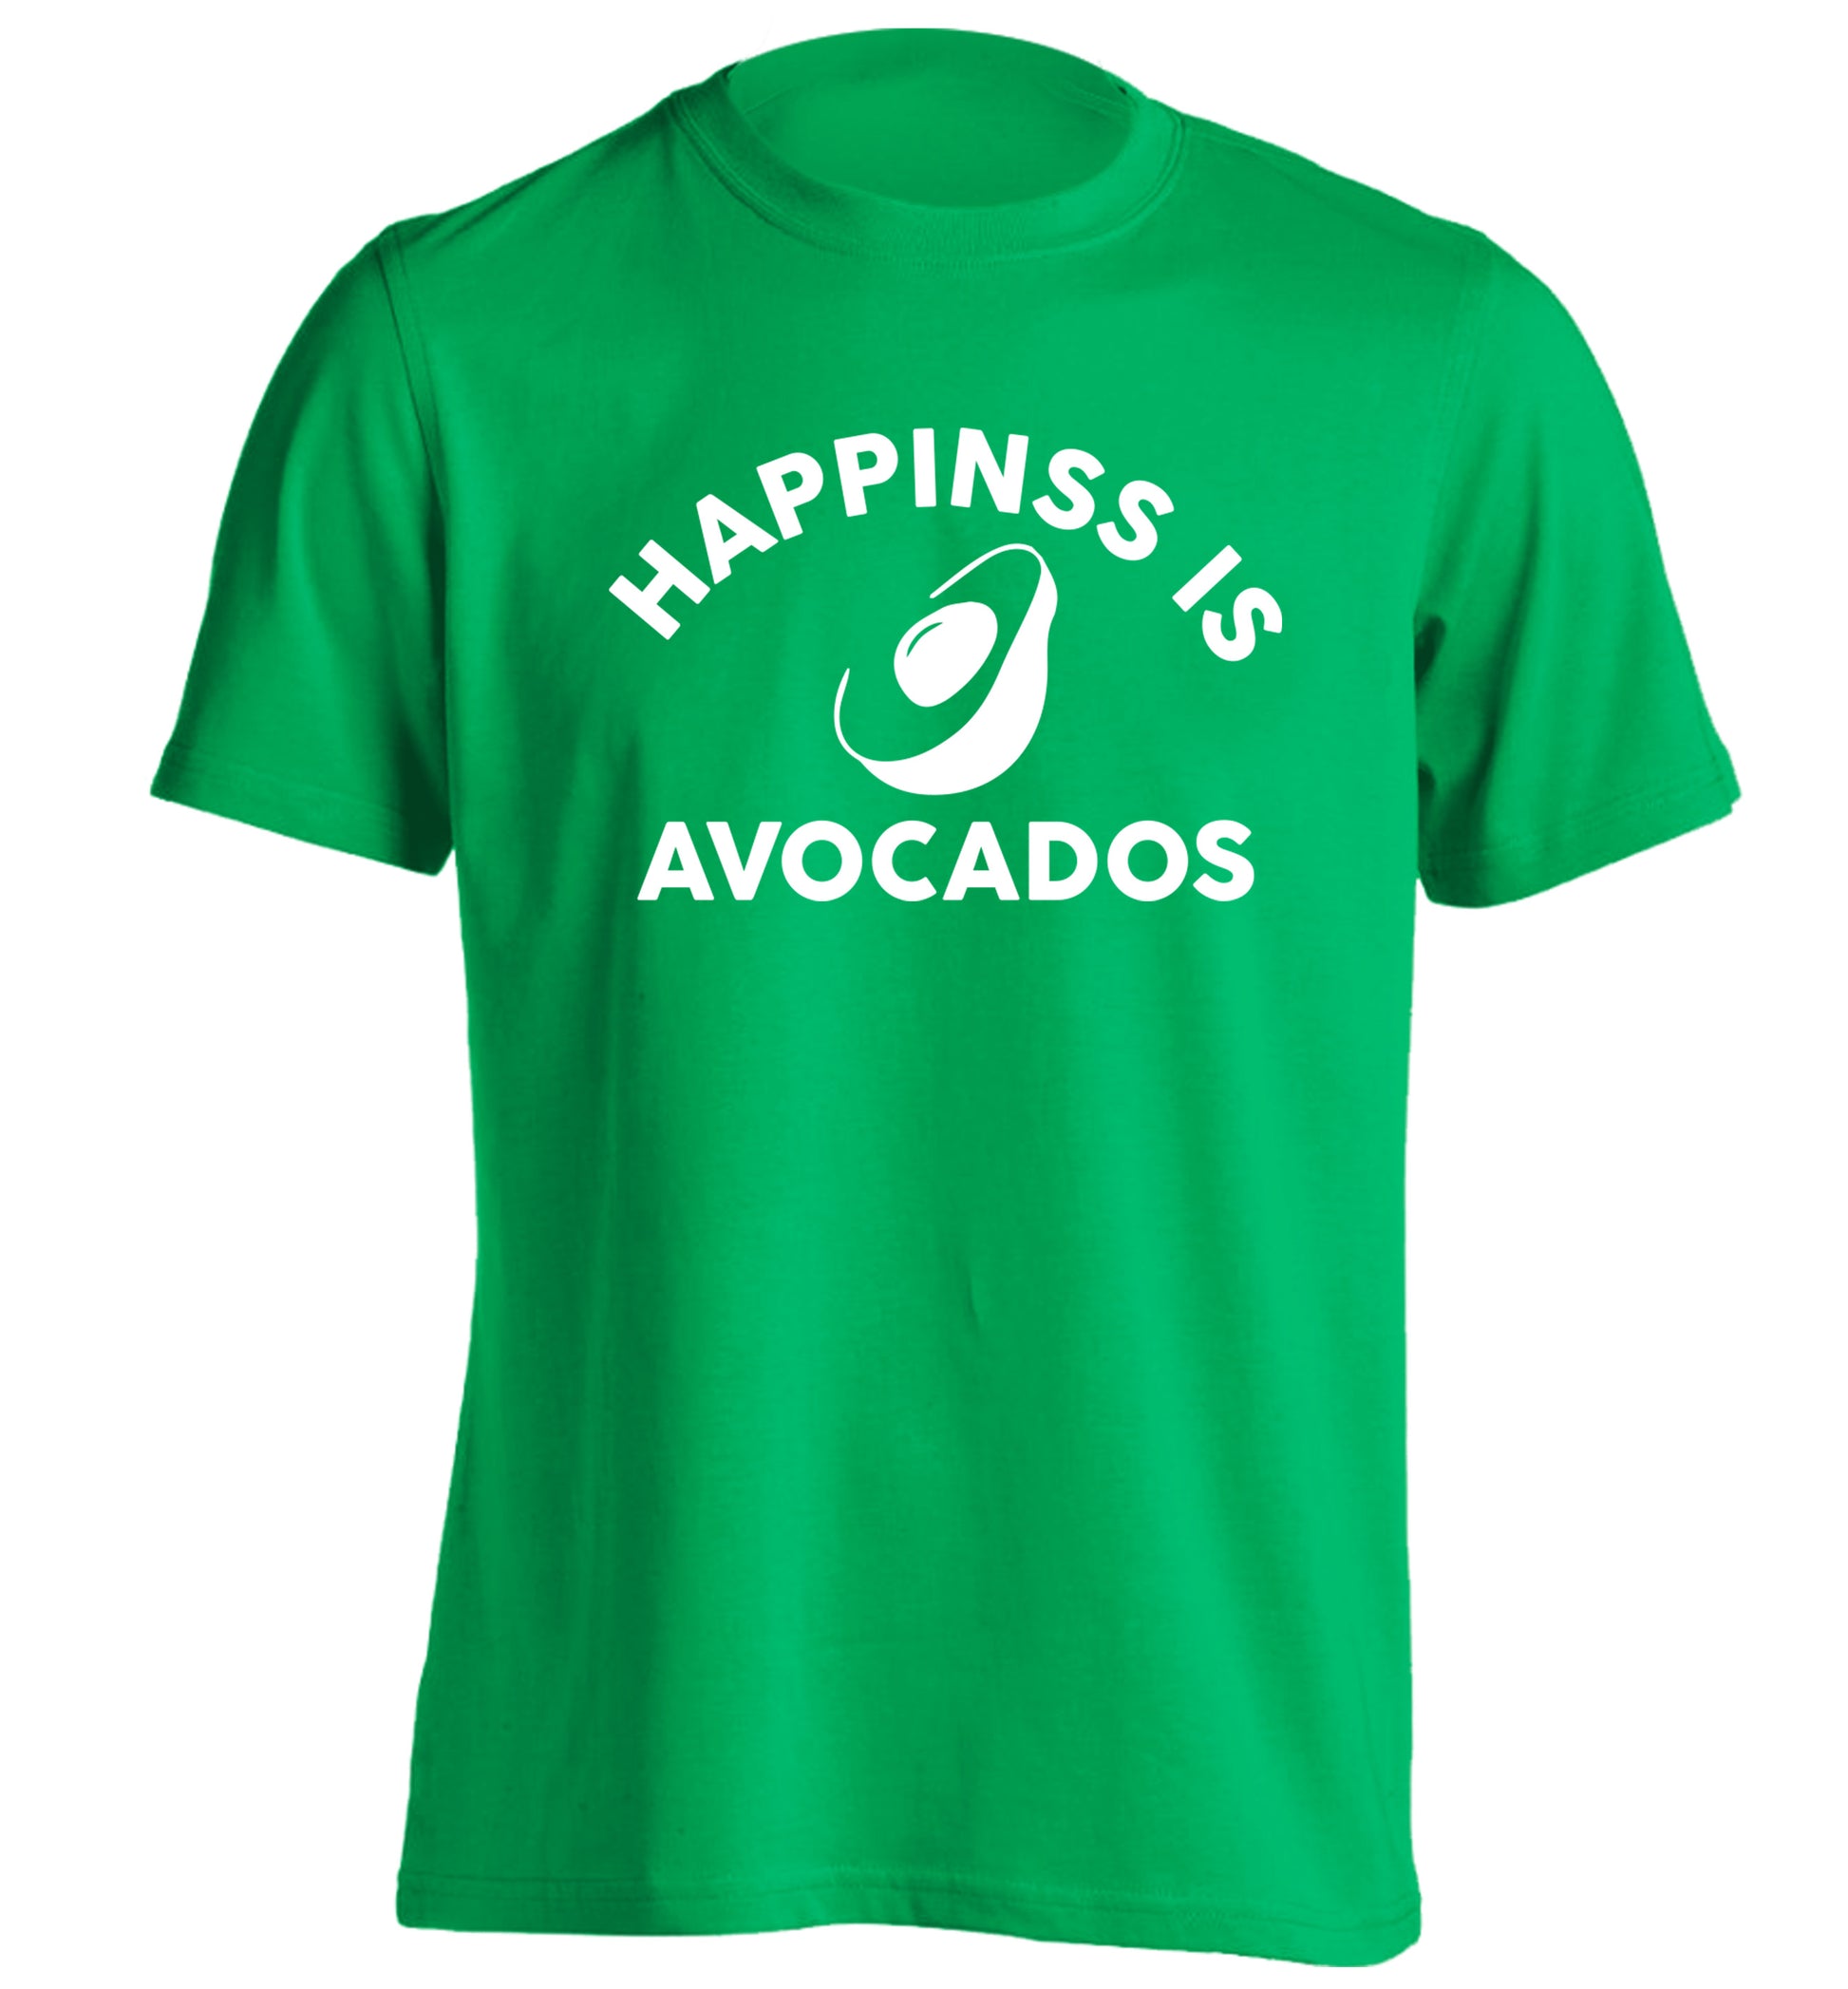 Happiness is avocados adults unisex green Tshirt 2XL